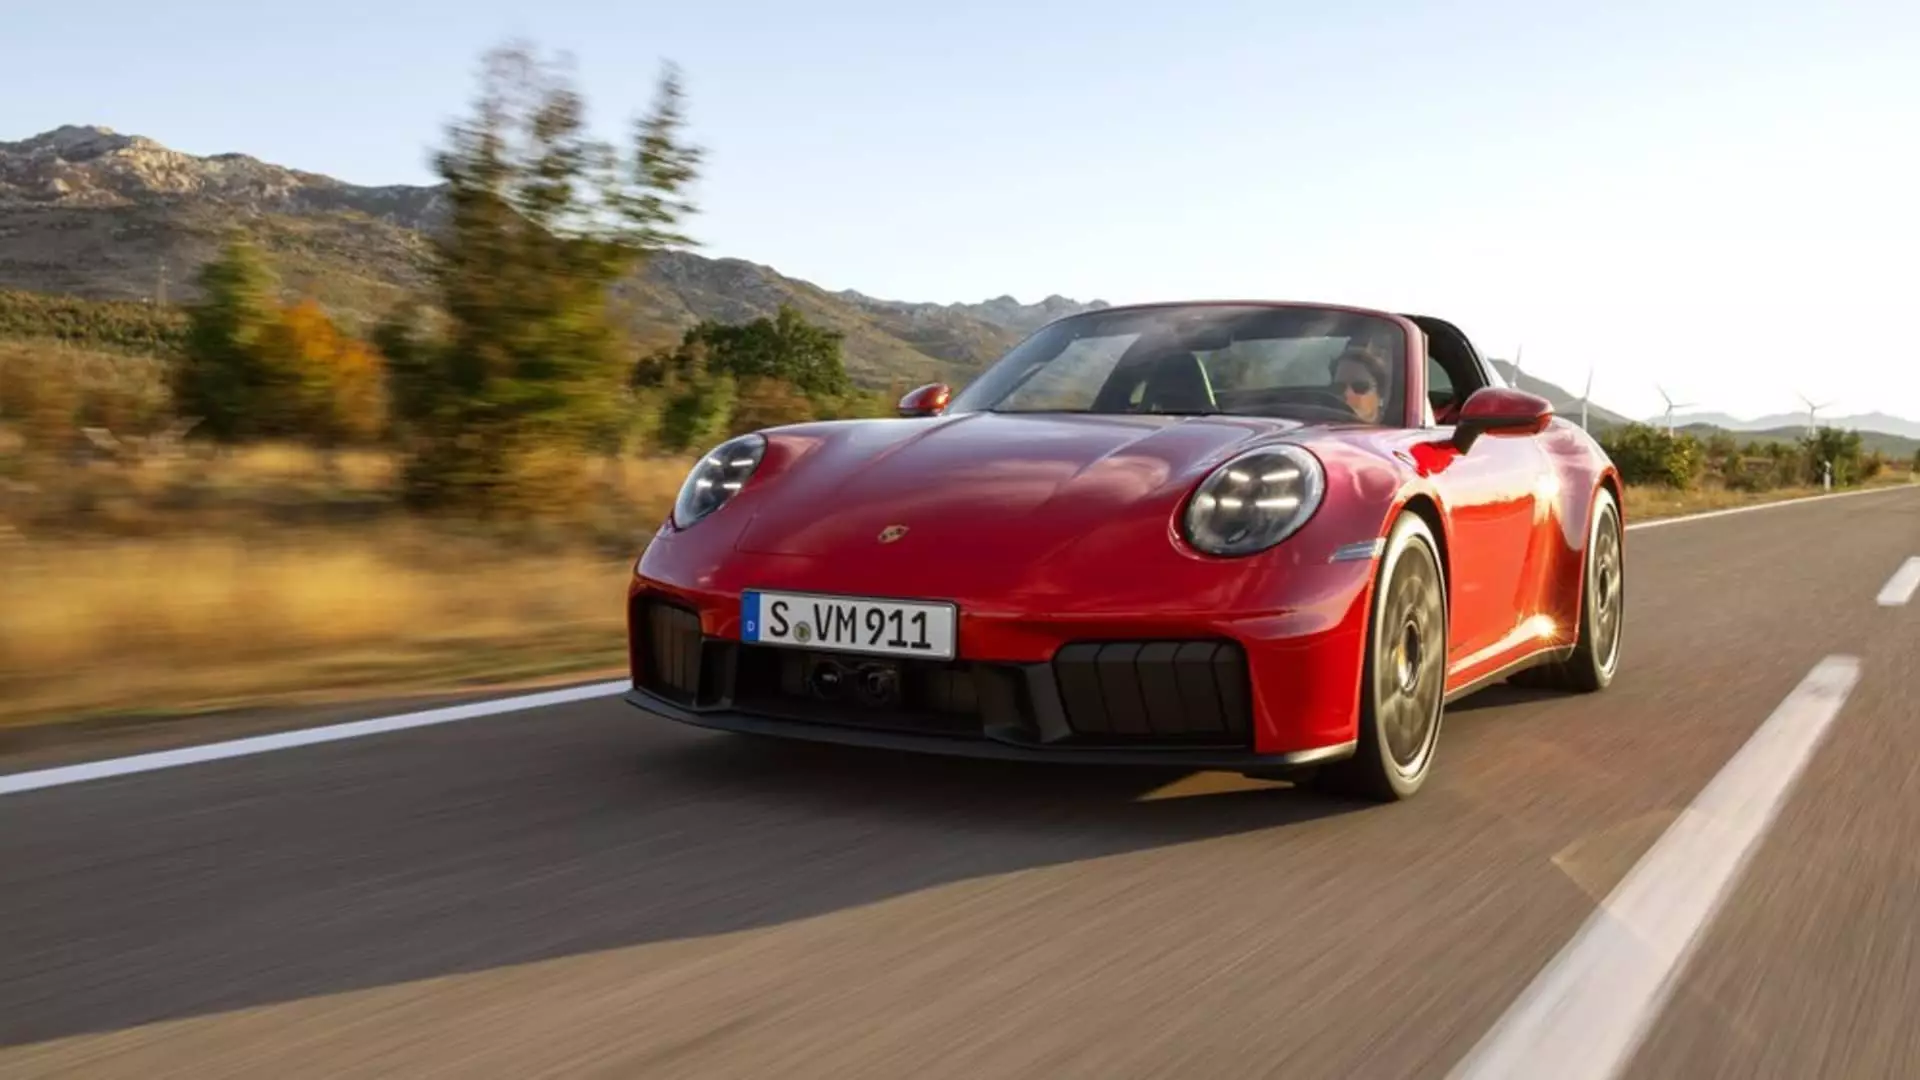 The Porsche 911 Carrera GTS Hybrid: A Game-Changer in the Automotive Industry